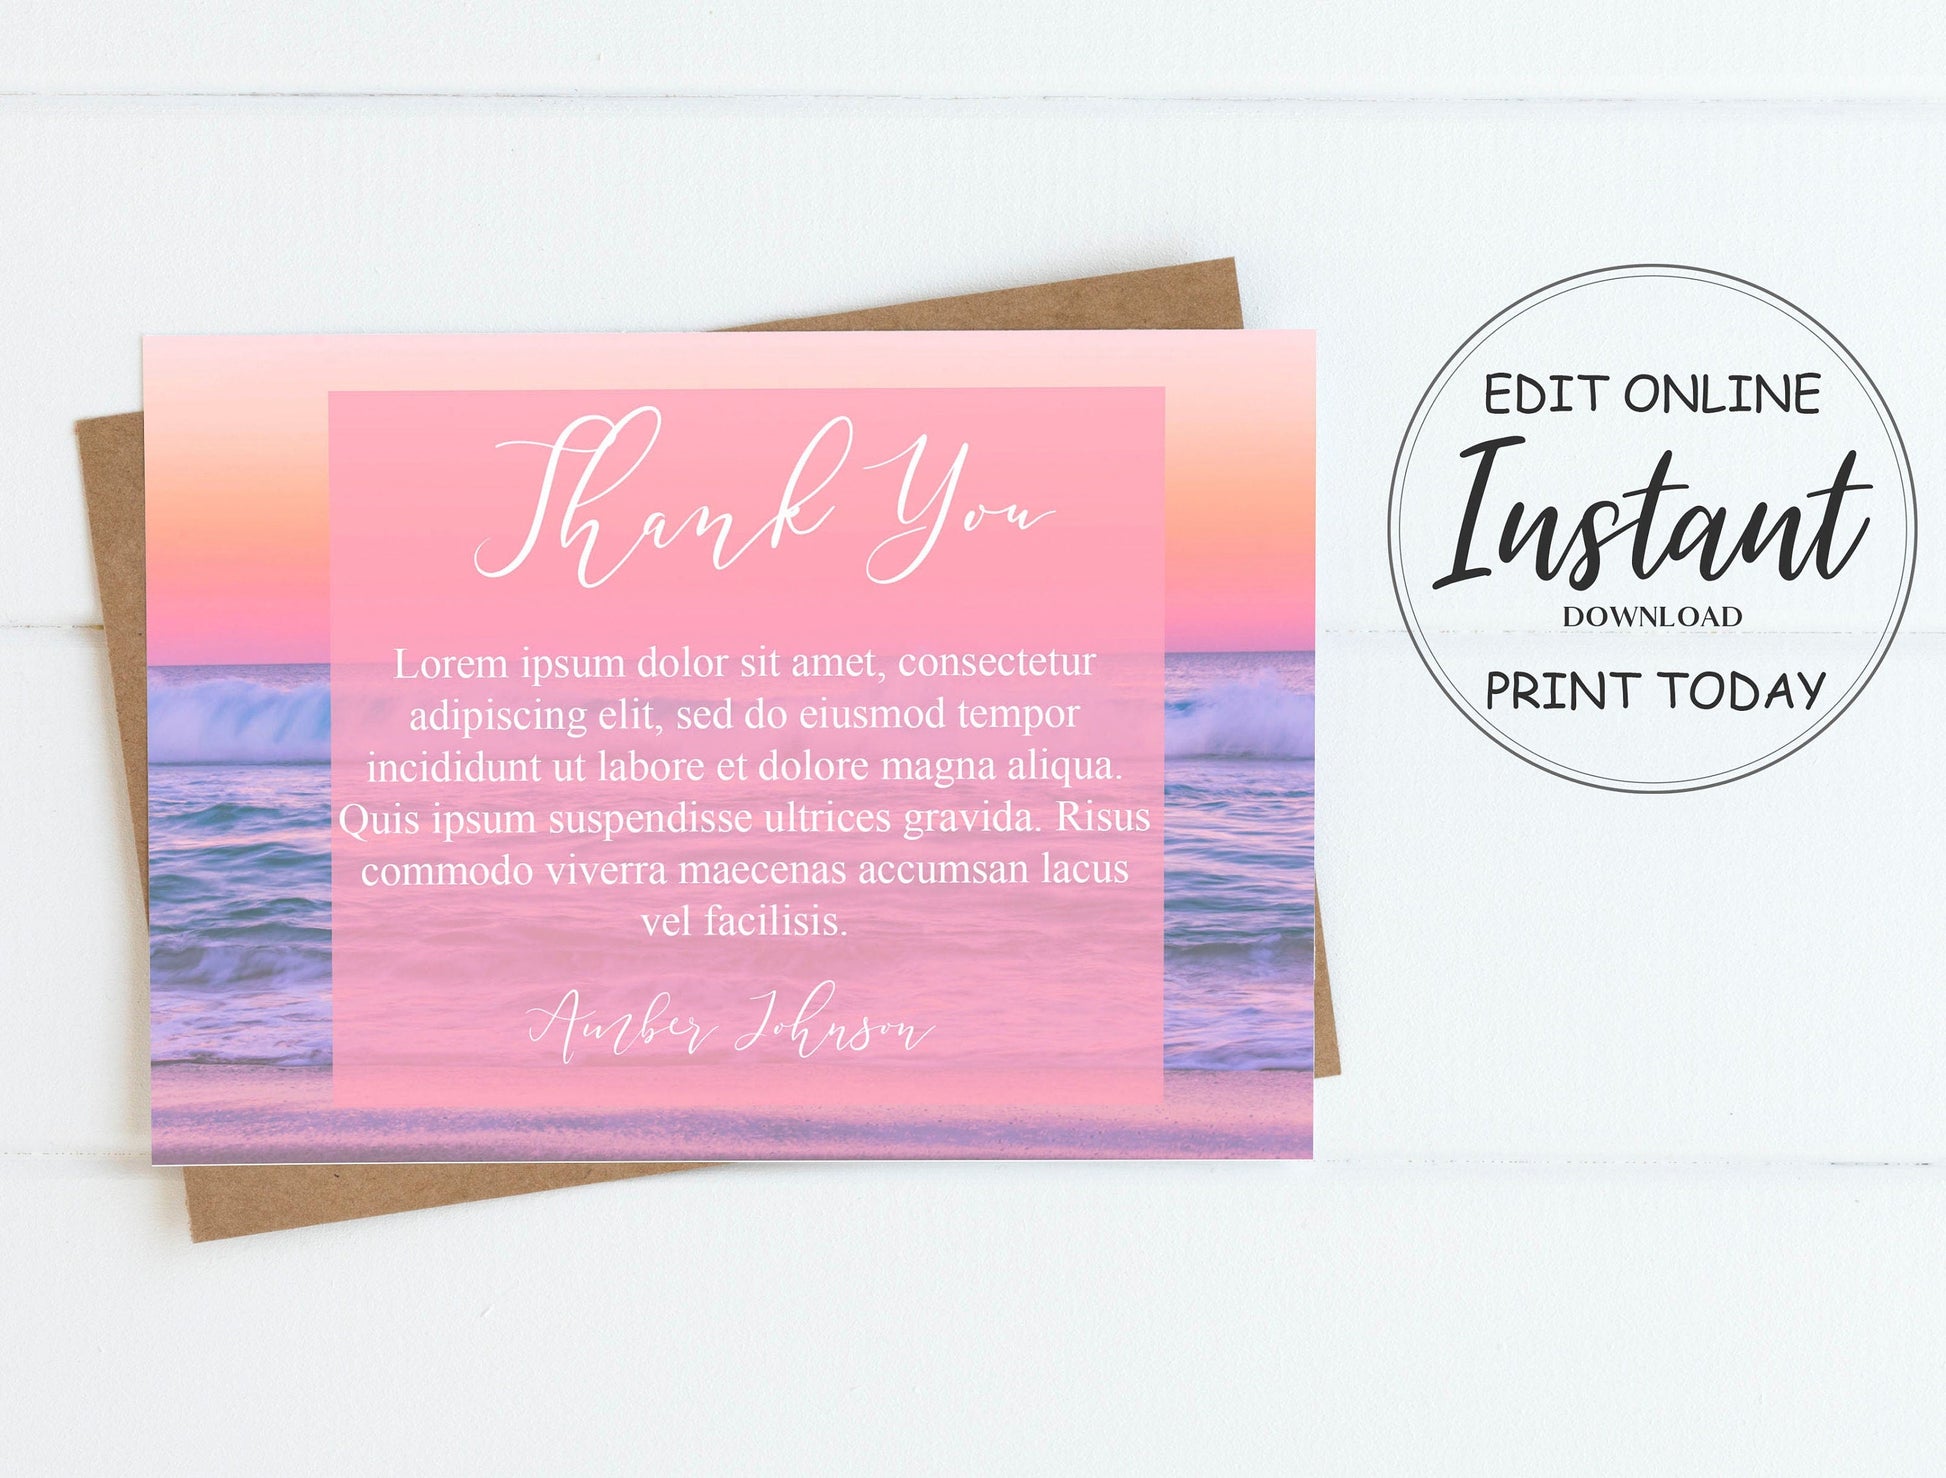 Funeral services thank you card templates editable